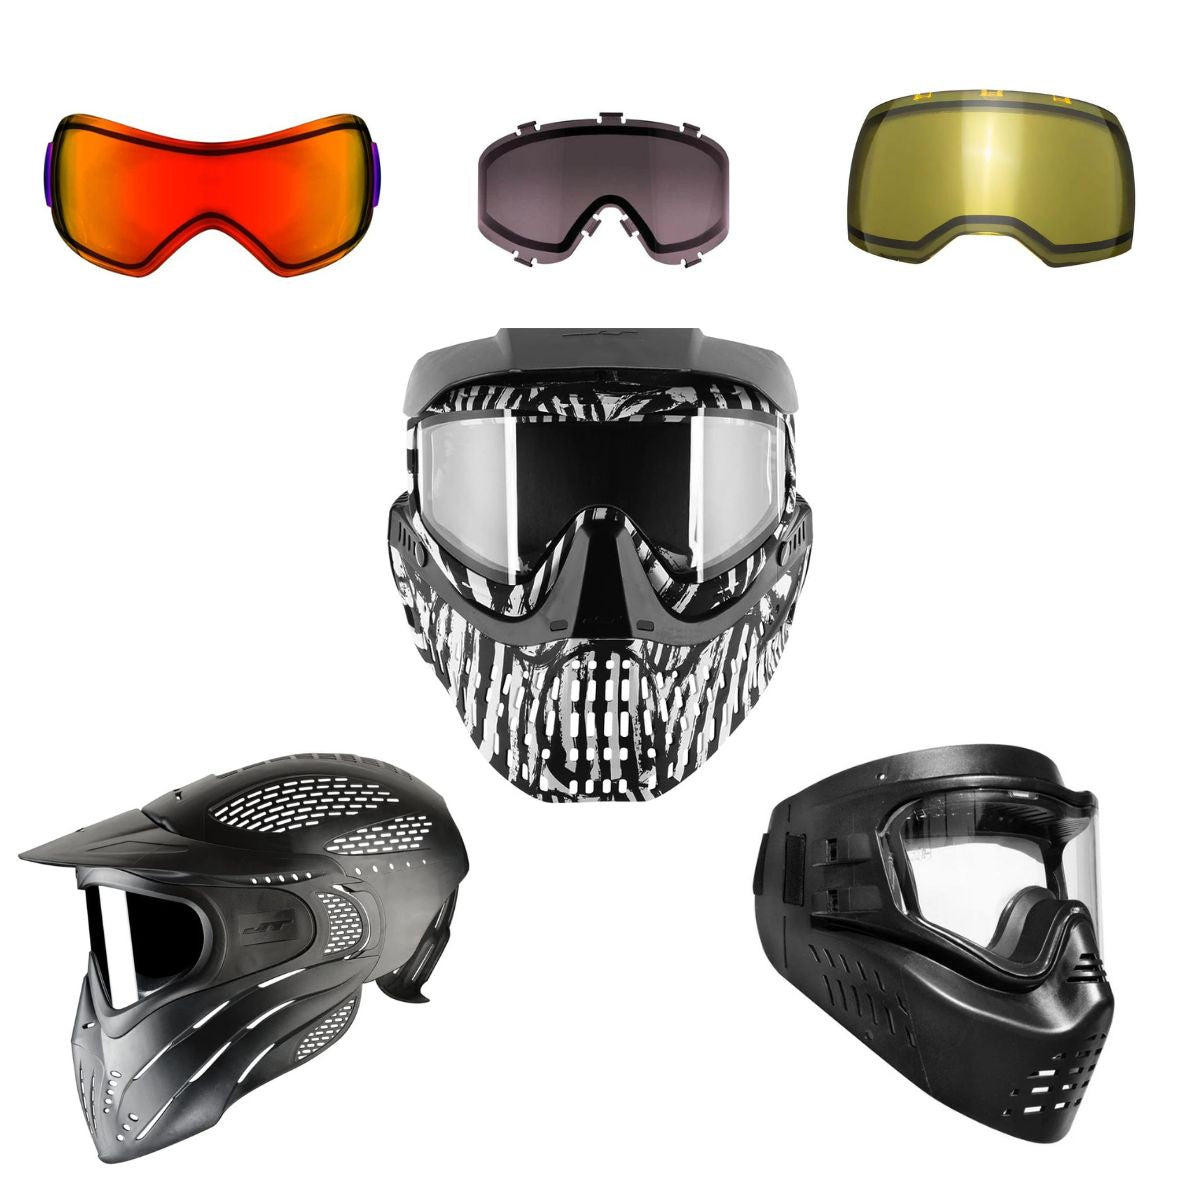 Paintball Goggles and Accessories